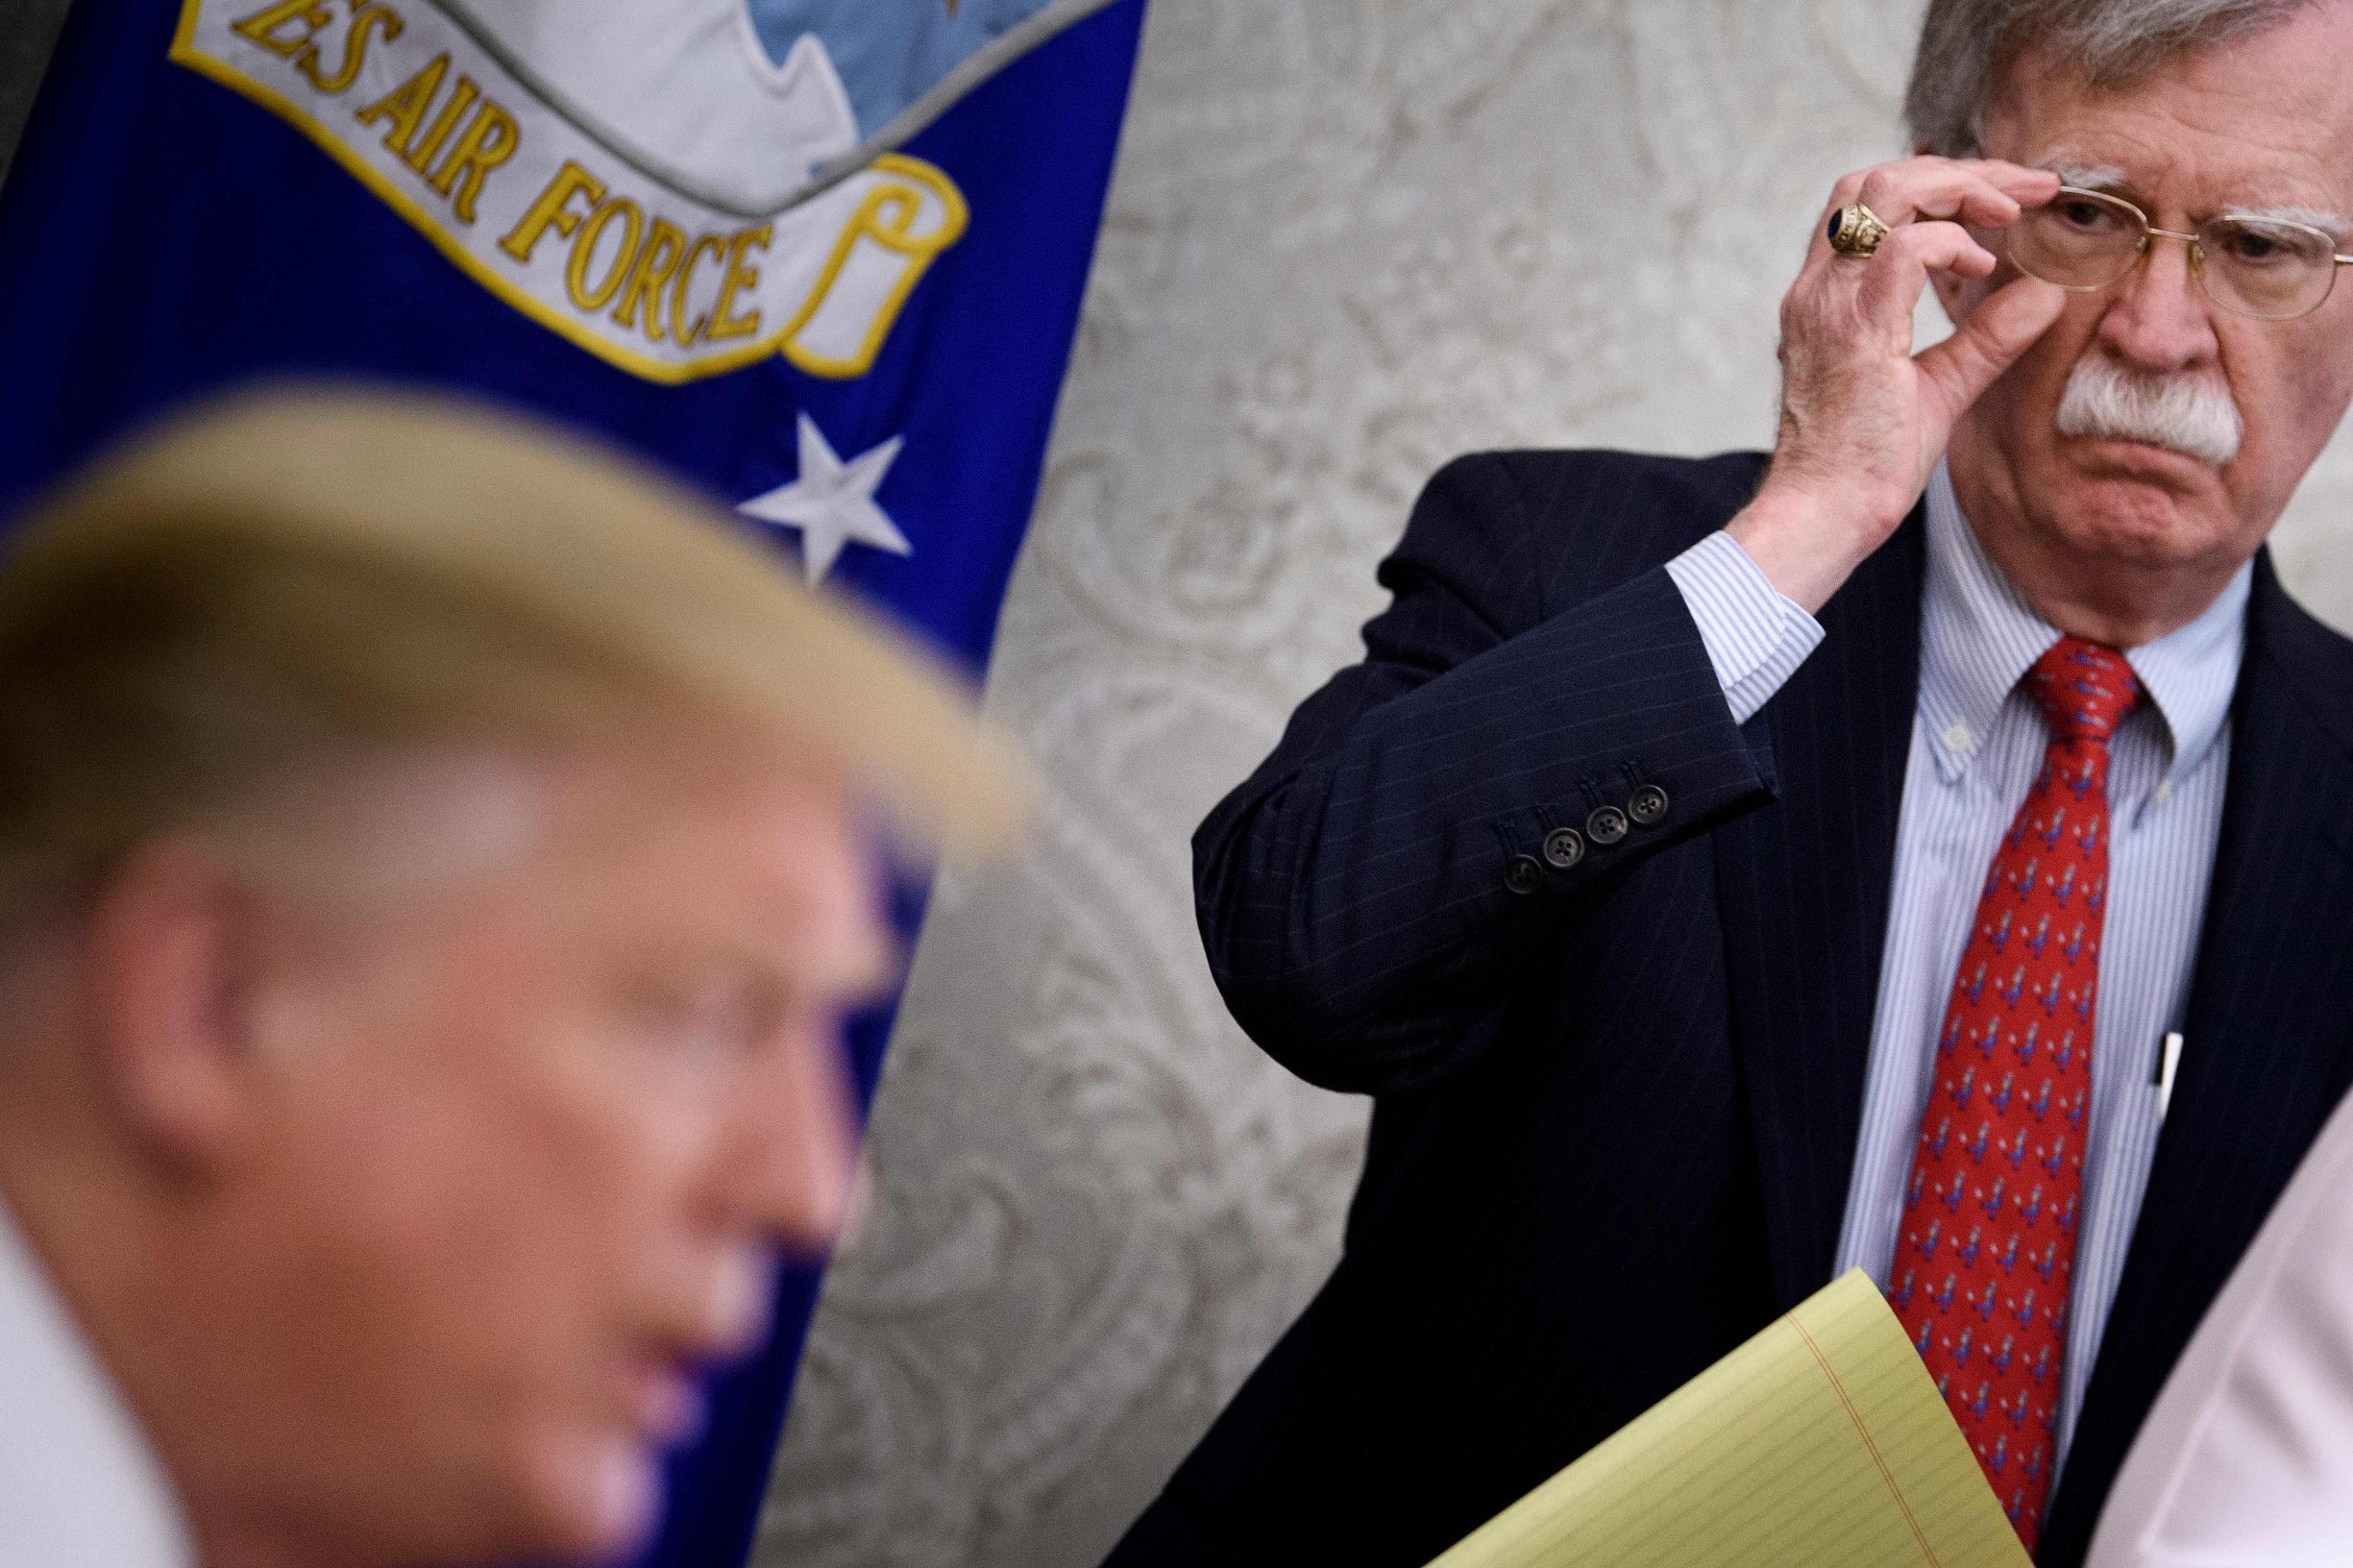 (FILES) In this file photo taken on May 13, 2019 National Security Advisor John Bolton listens while US President Donald Trump speaks to the press before a meeting with Hungary's Prime Minister Viktor Orban in the Oval Office of the White House in Washington, DC. - President Donald Trump on January 27, 2020 denied that he told his former national security advisor John Bolton that military aid to Ukraine was tied to Kiev investigating his political rivals. Trump's tweets came after The New York Times reported Sunday that Bolton alleges as much in a draft of his upcoming book.